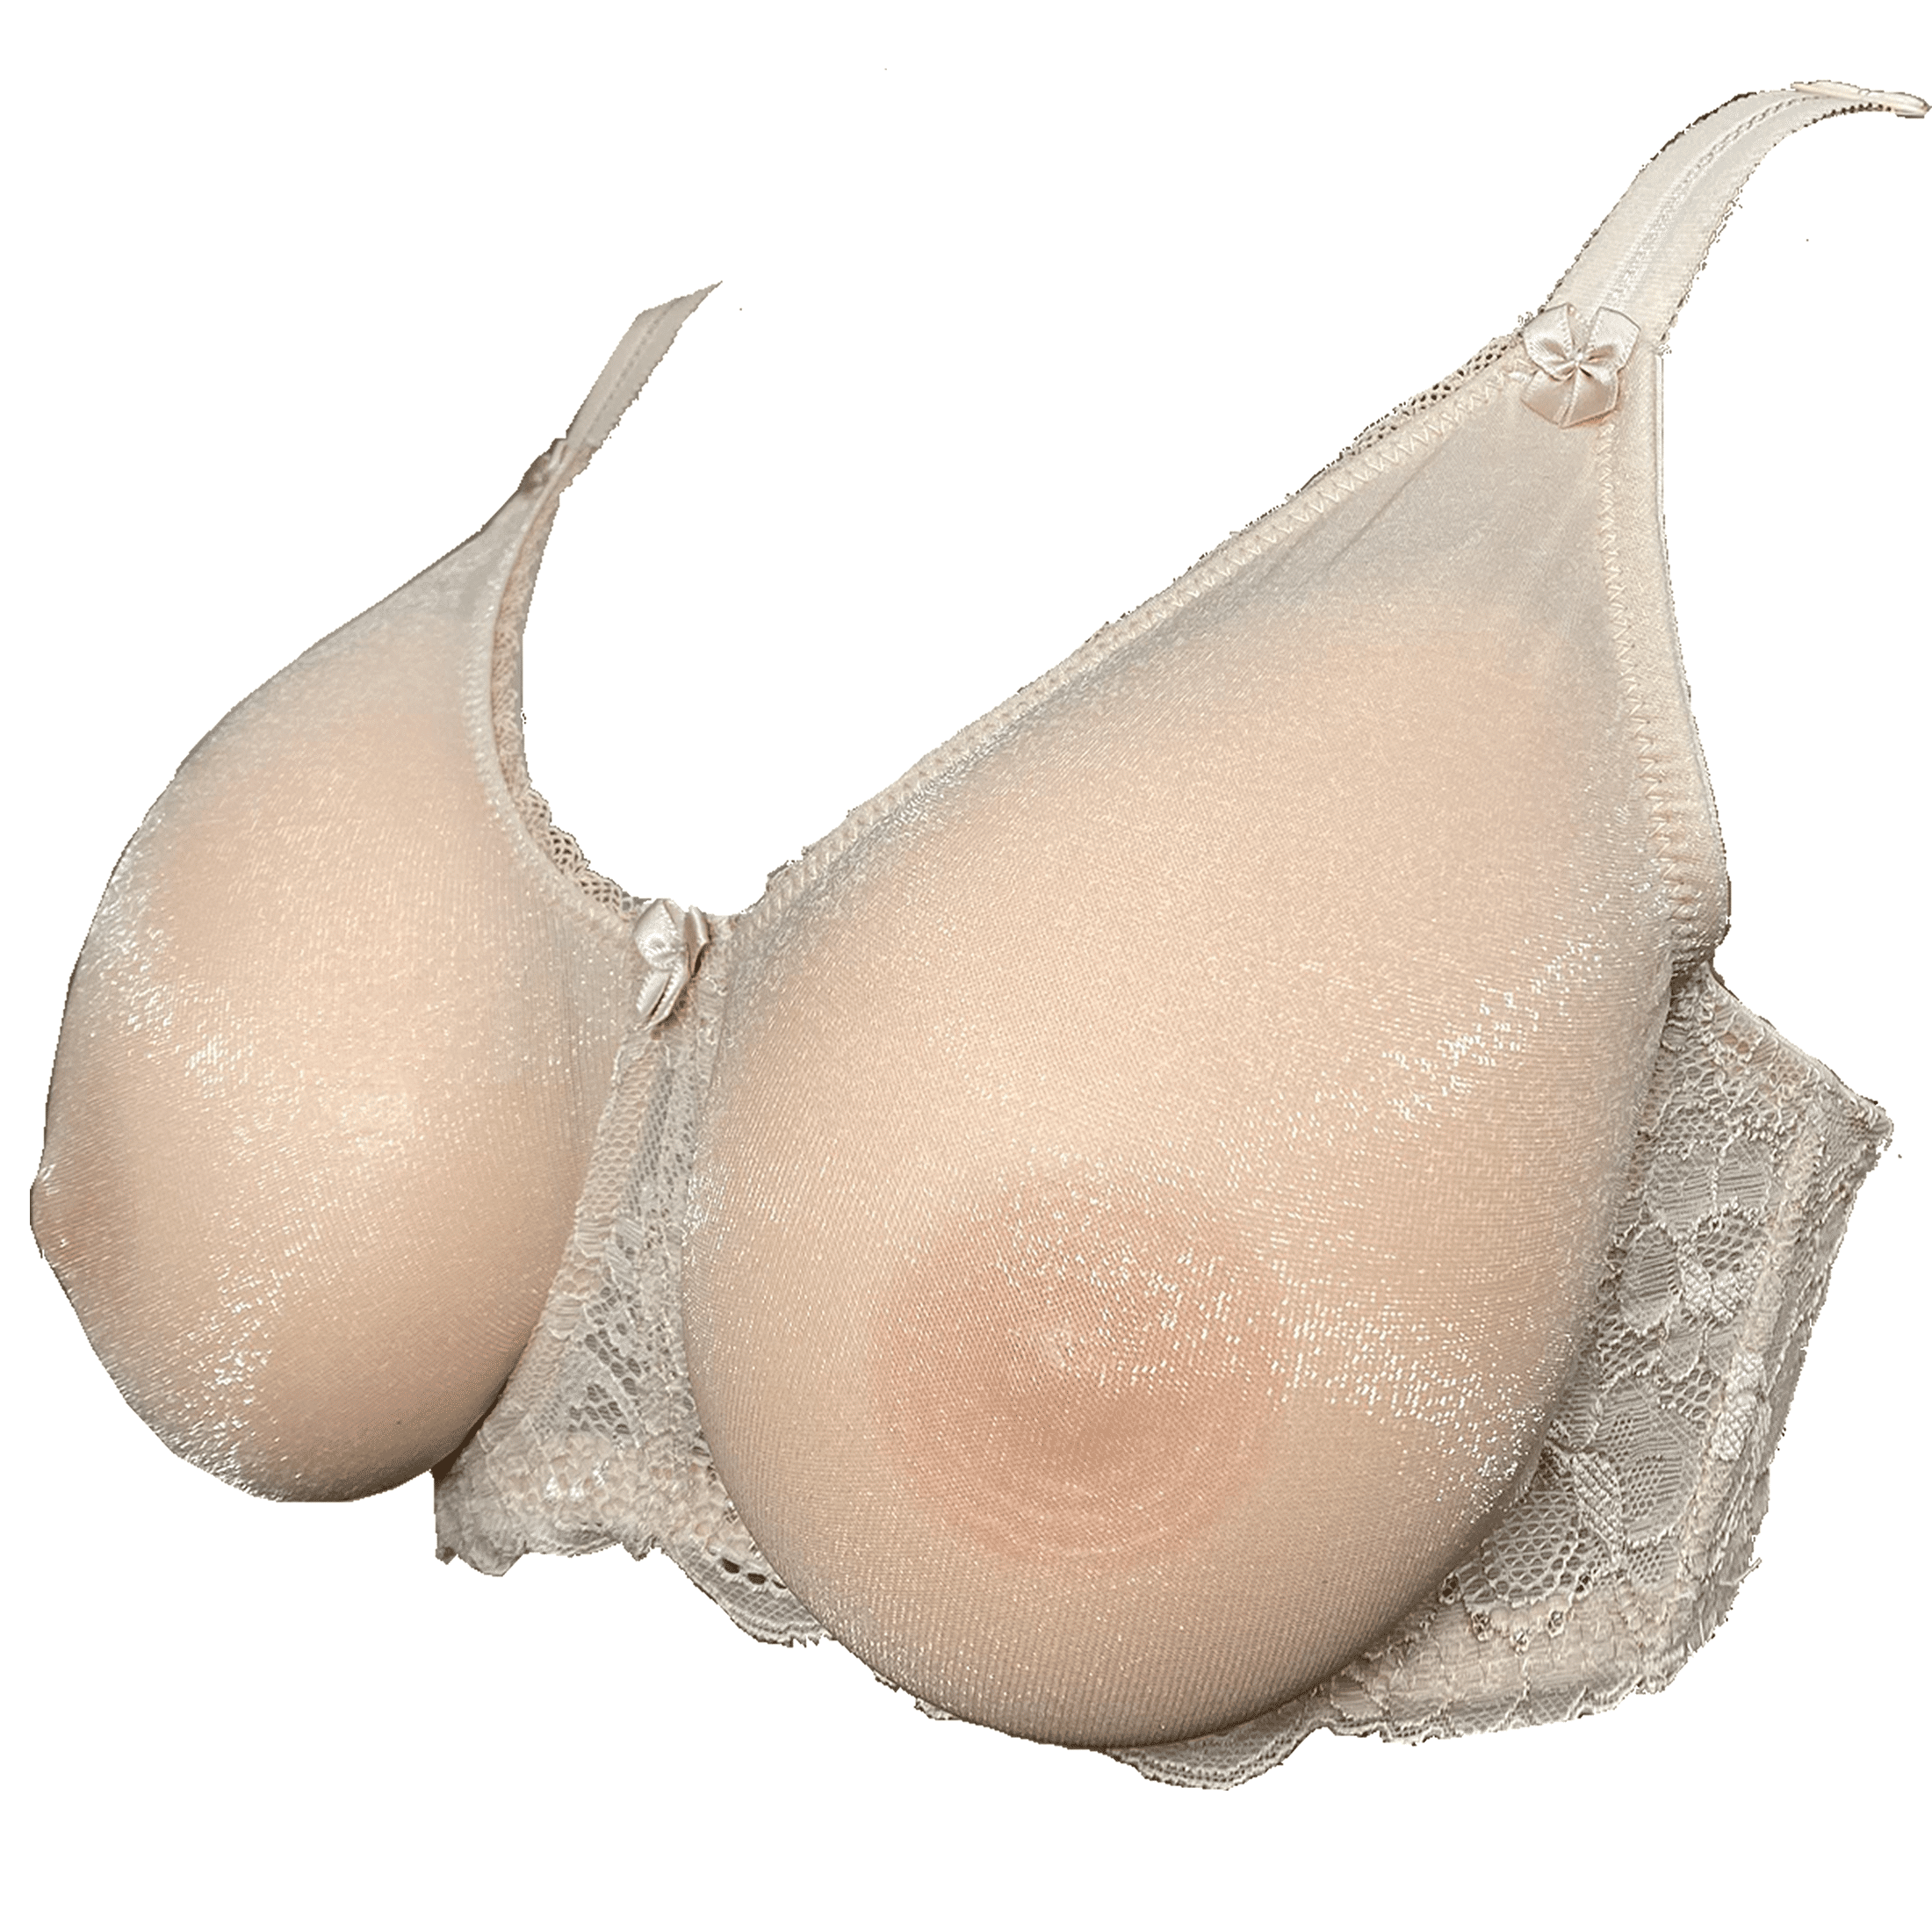 BIMEI Front-Closure Mastectomy Bra with Pocket - Breastform Pads Included -  Adjustable - Cotton Comfort and Leisure Soft Daily Bras for Women,Beige,2XL  